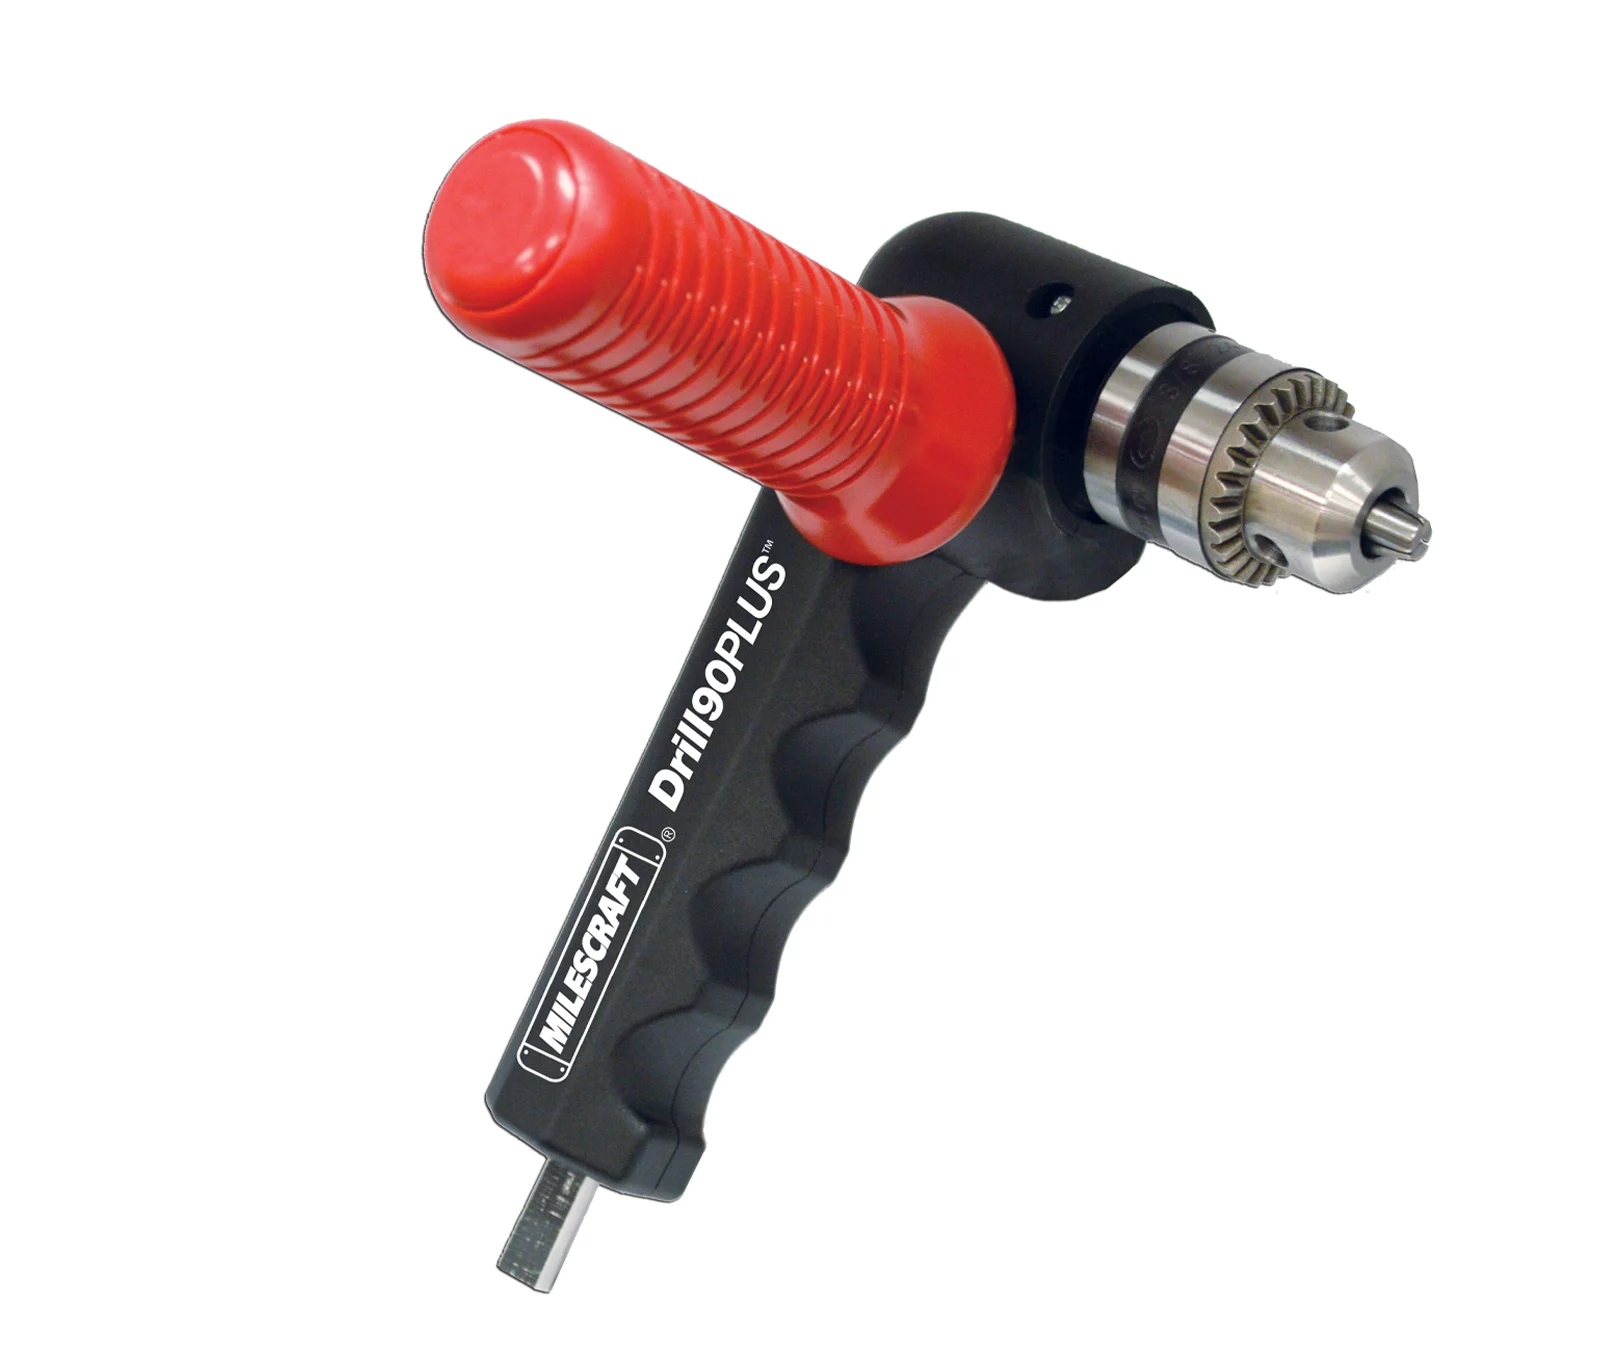 Milescraft Drill90PLUS Right Angle Drill Attachment with Keyless